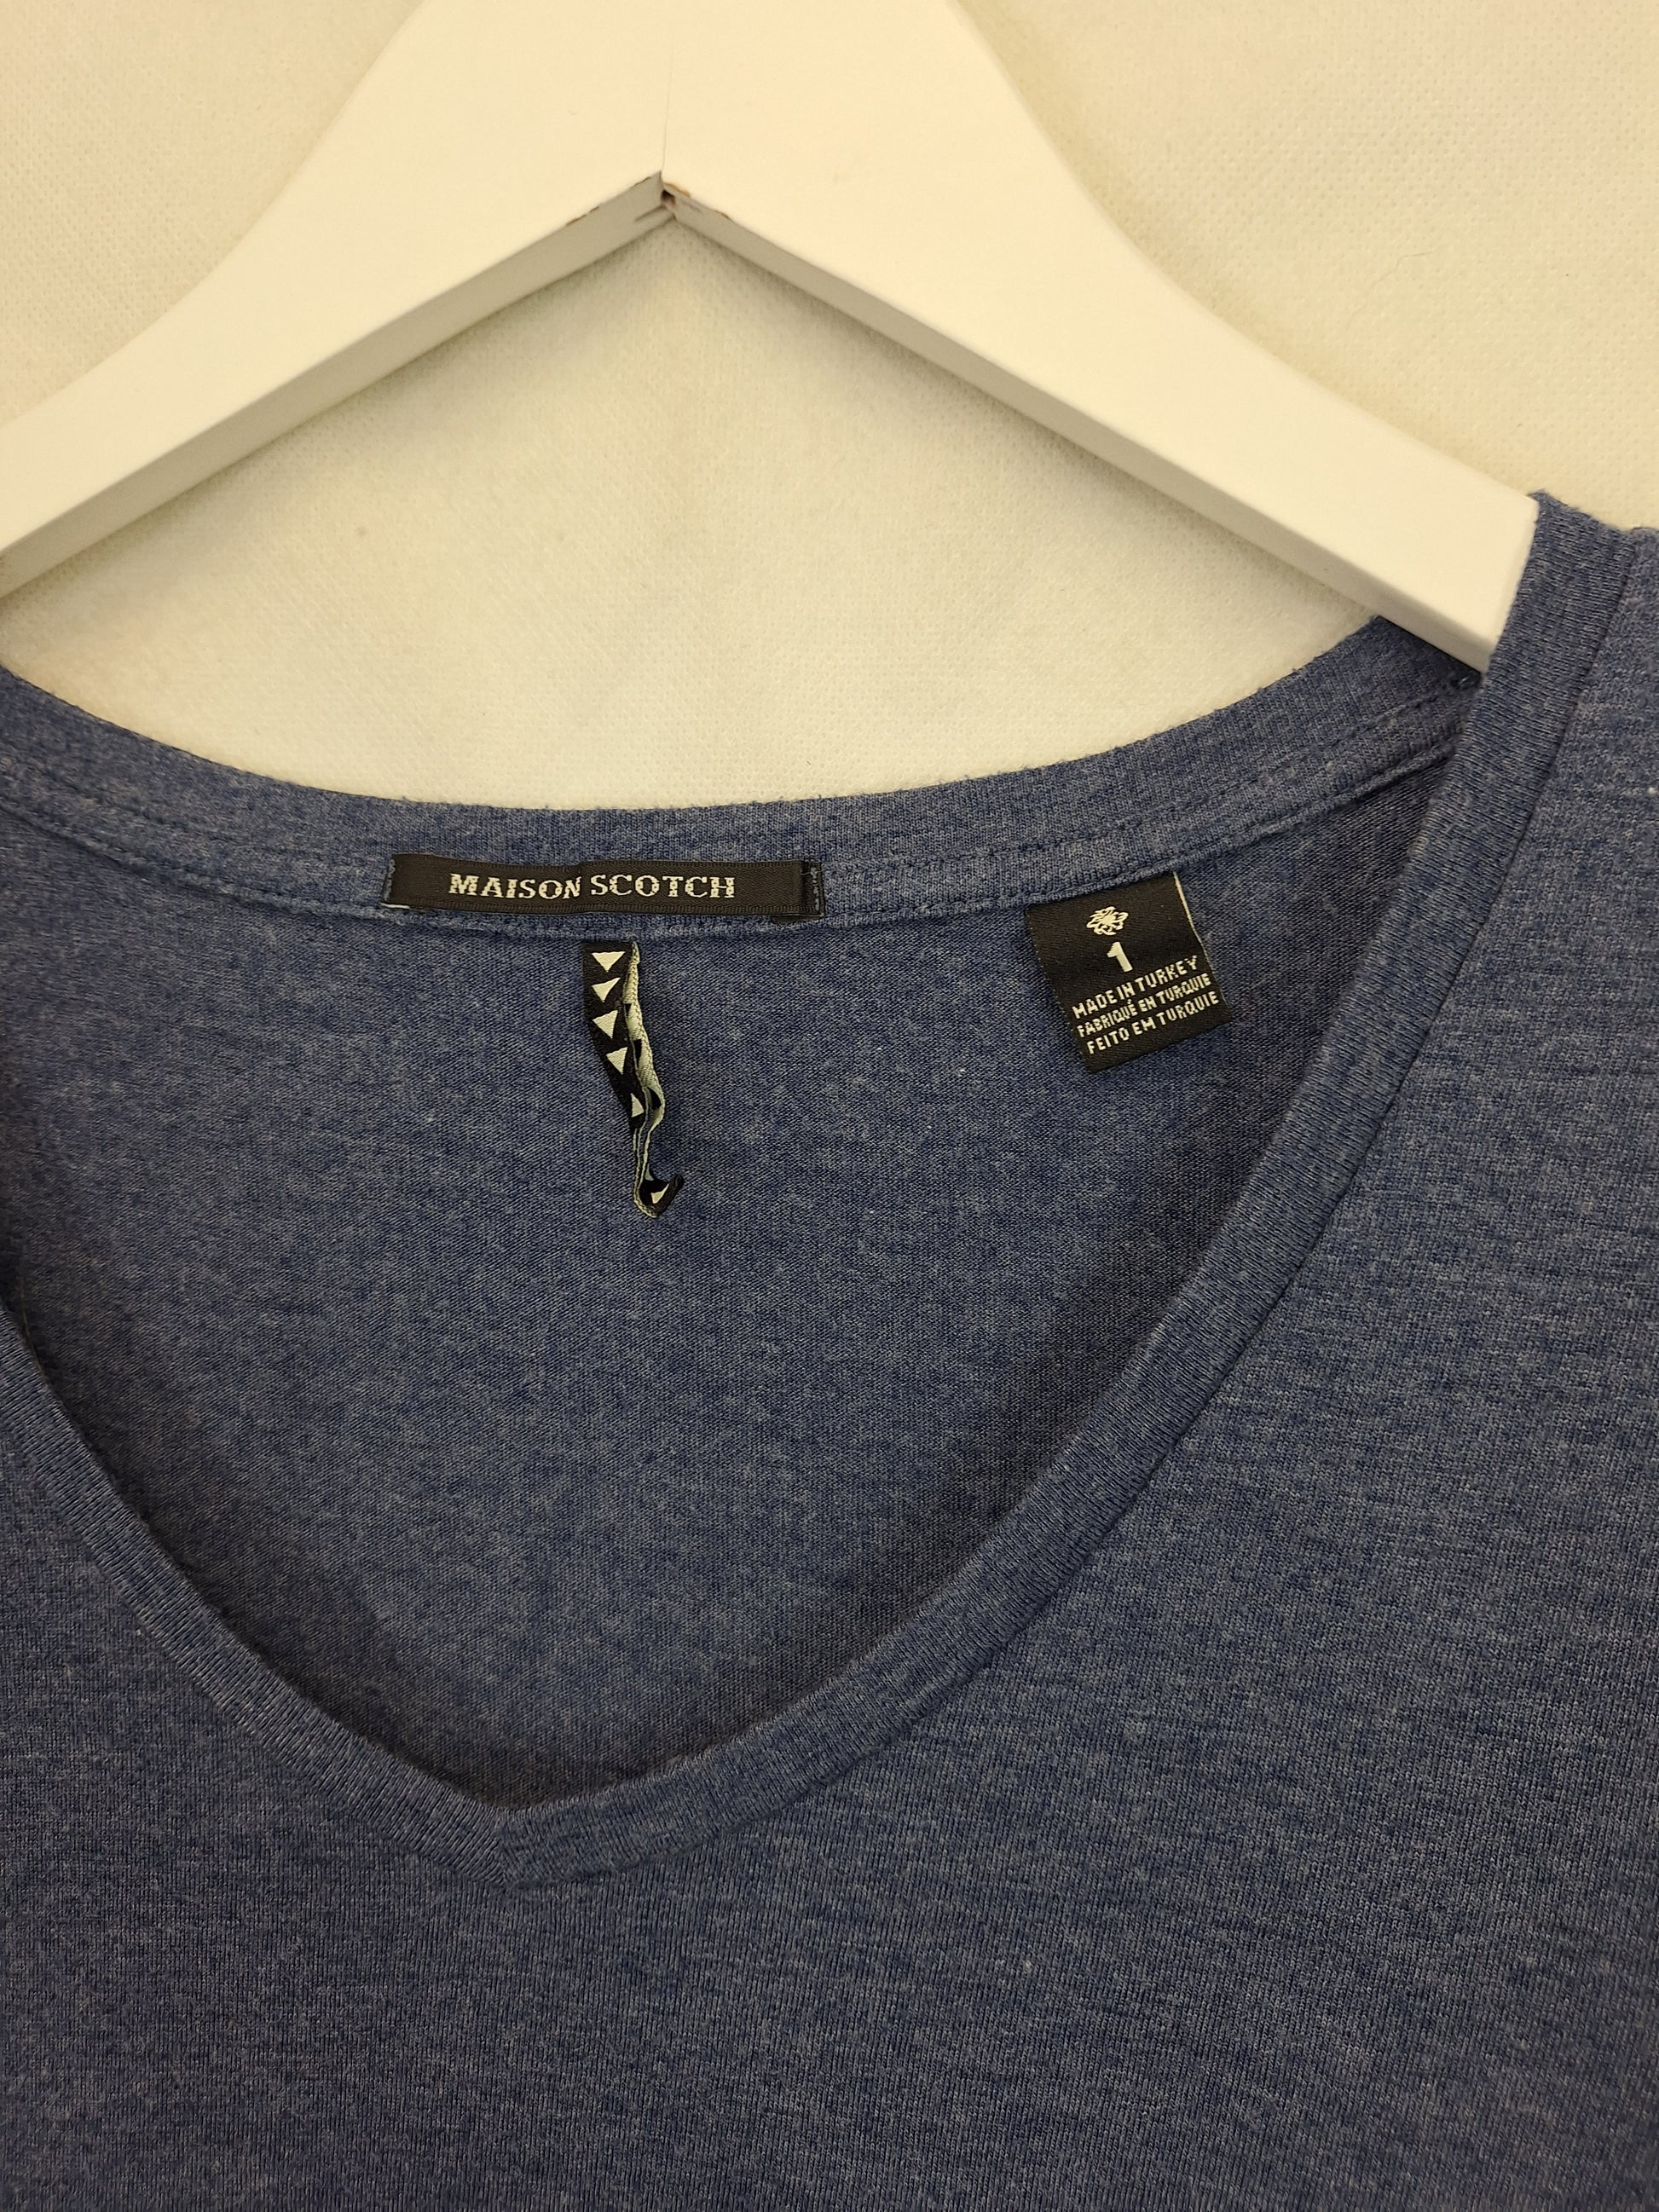 Scotch & Soda V Neck Basic Top Size 8 by SwapUp-Online Second Hand Store-Online Thrift Store